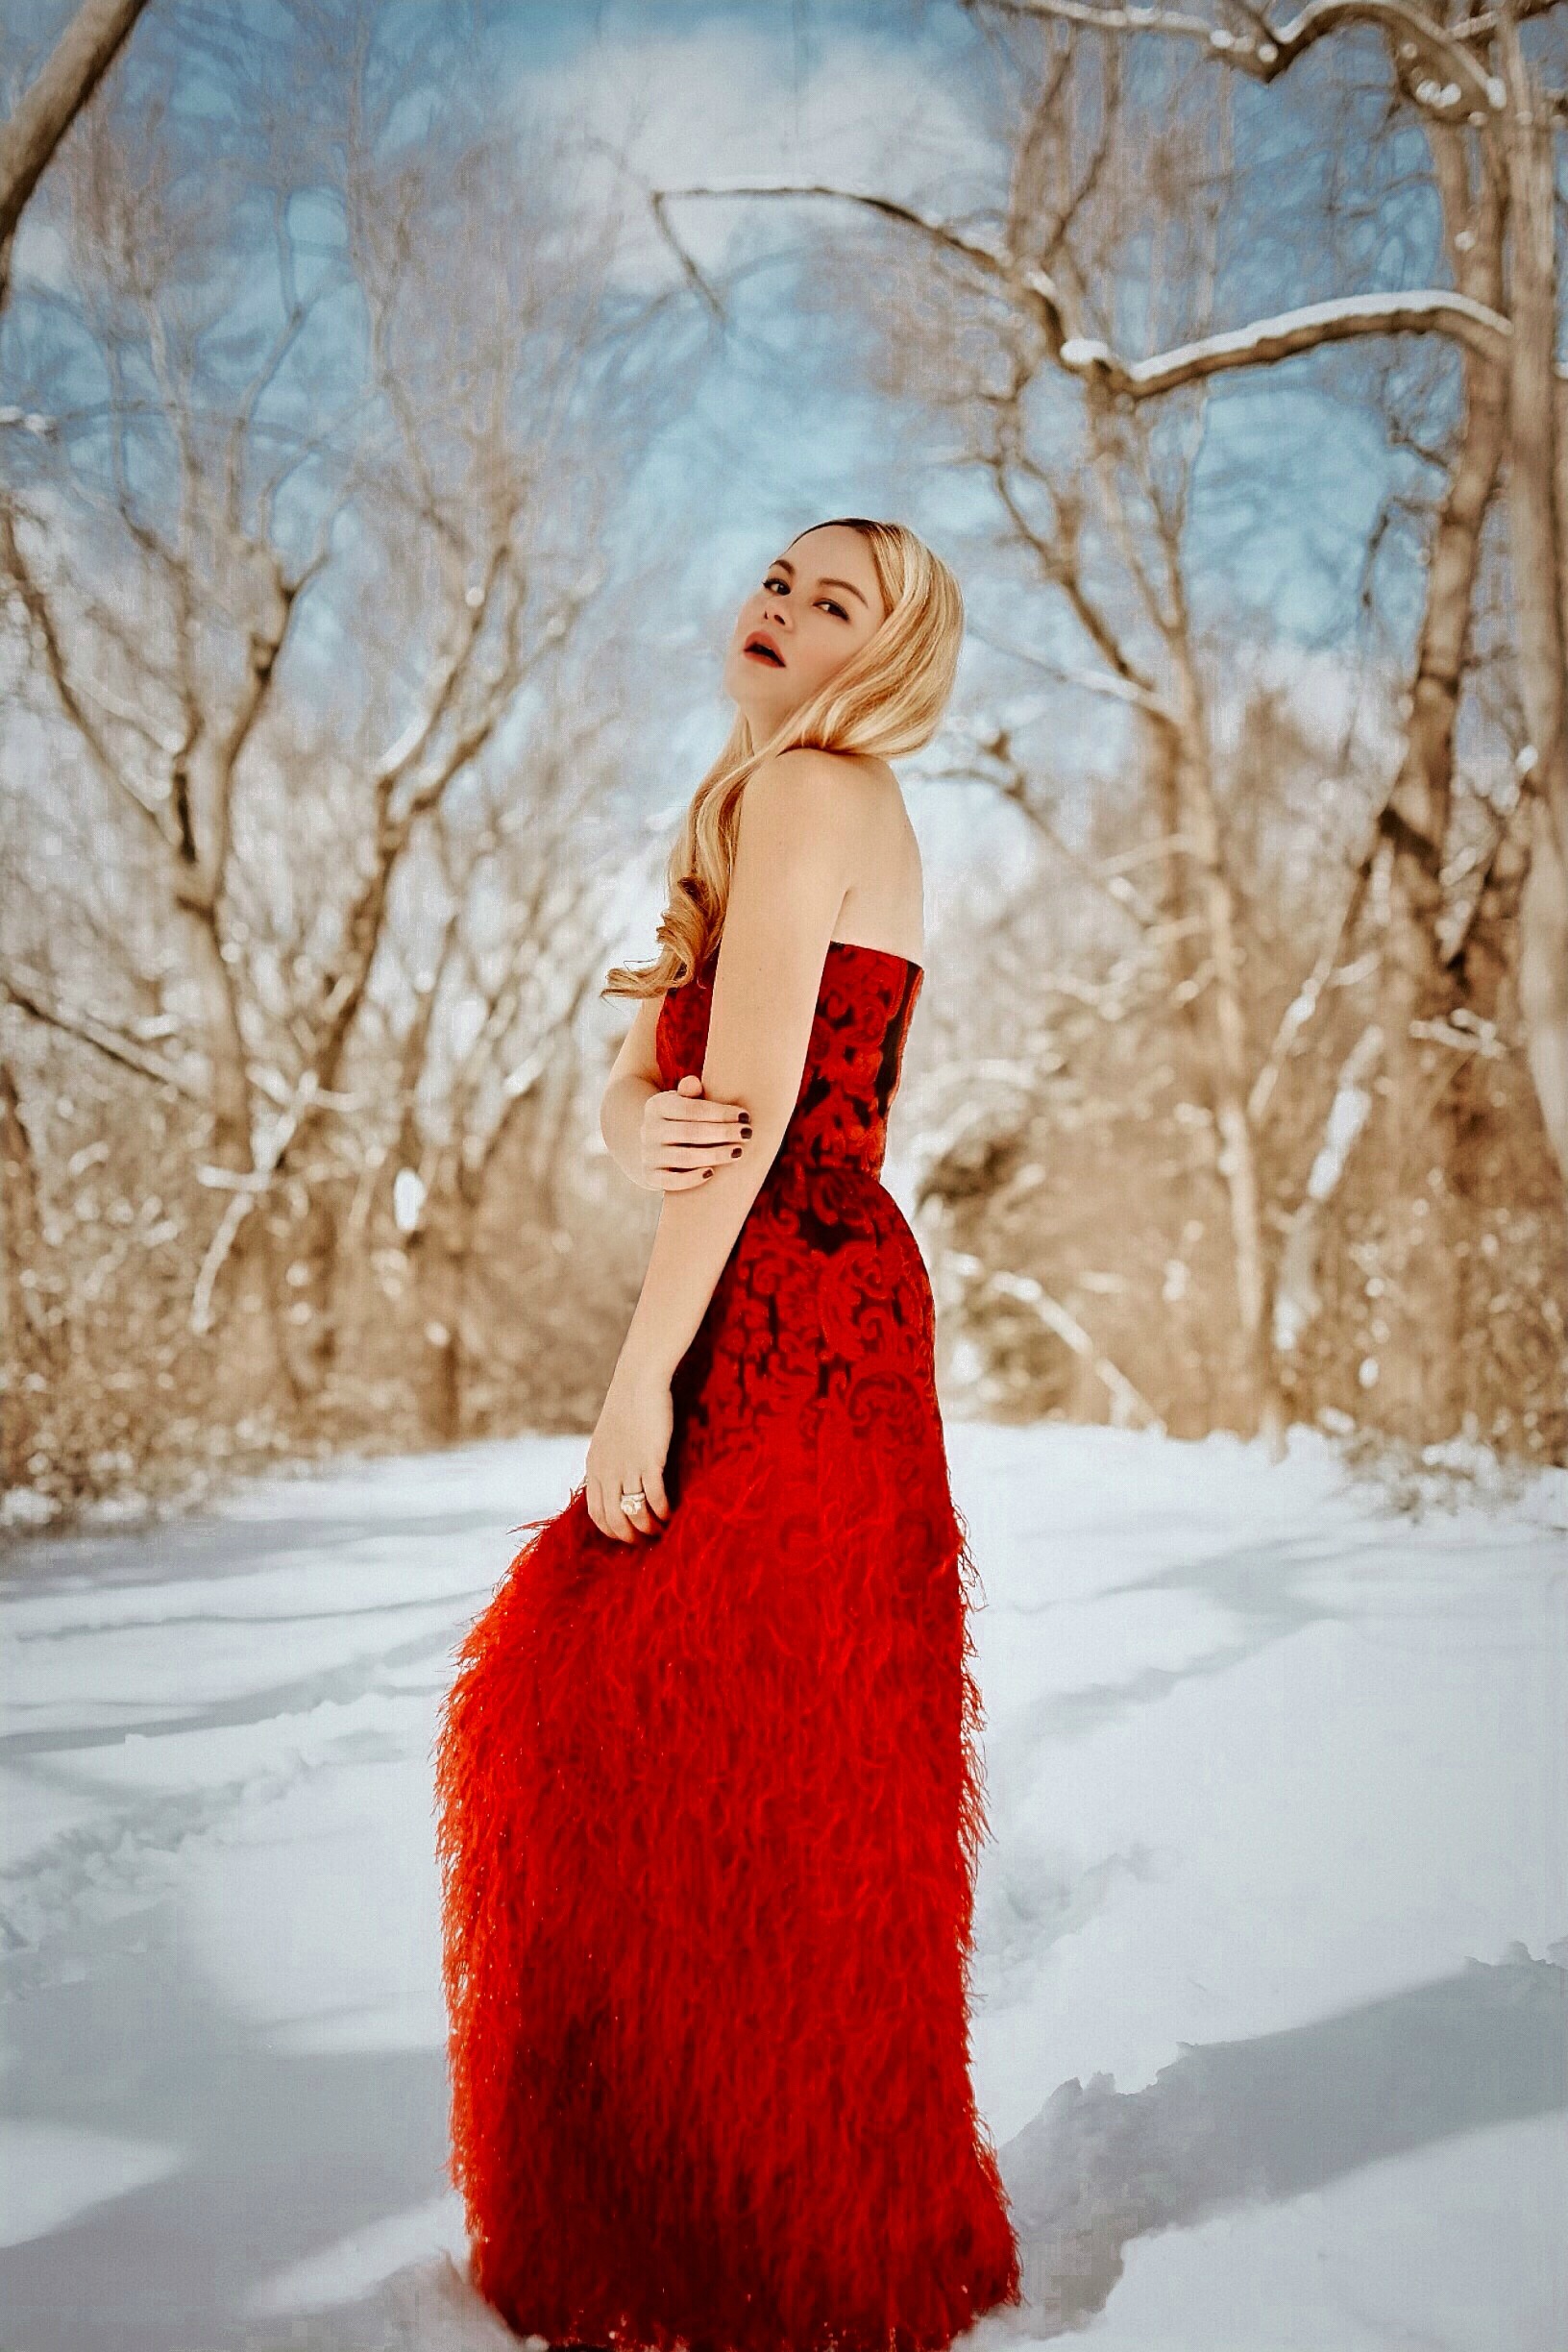 Frontier lava Behandling Red Dress In The Snow - What Would V Wear